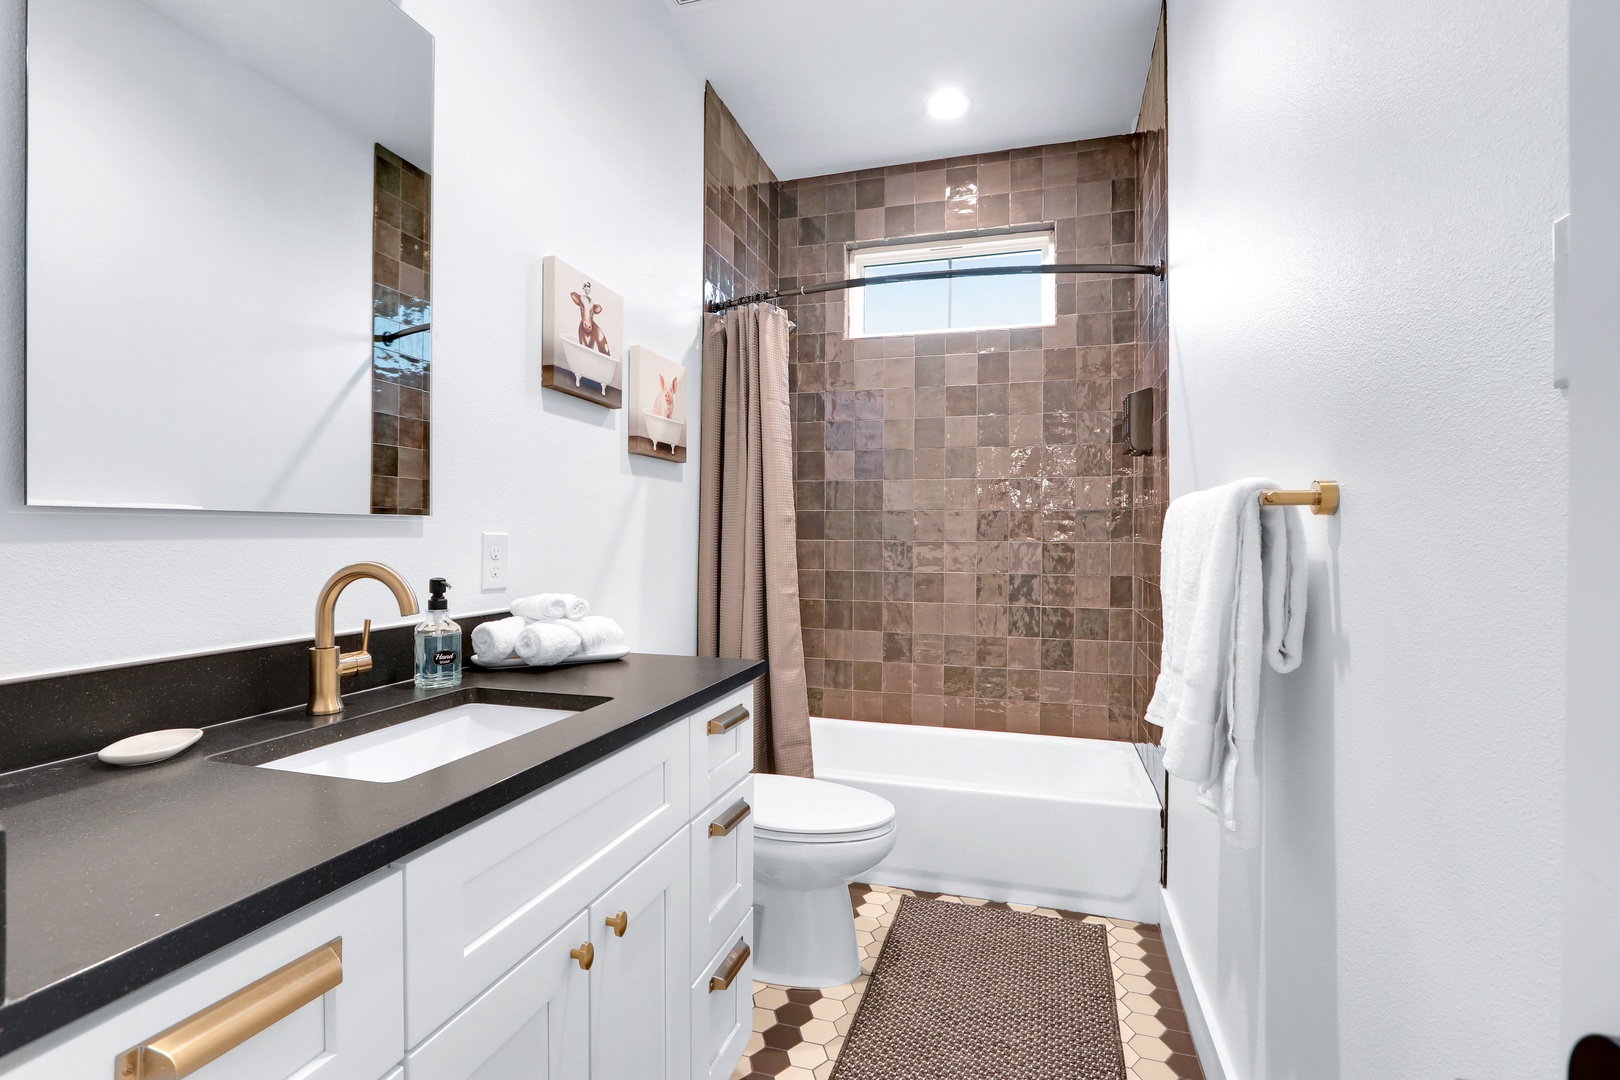 On the 2nd floor, this shared full bath offers a single vanity & shower/tub combo